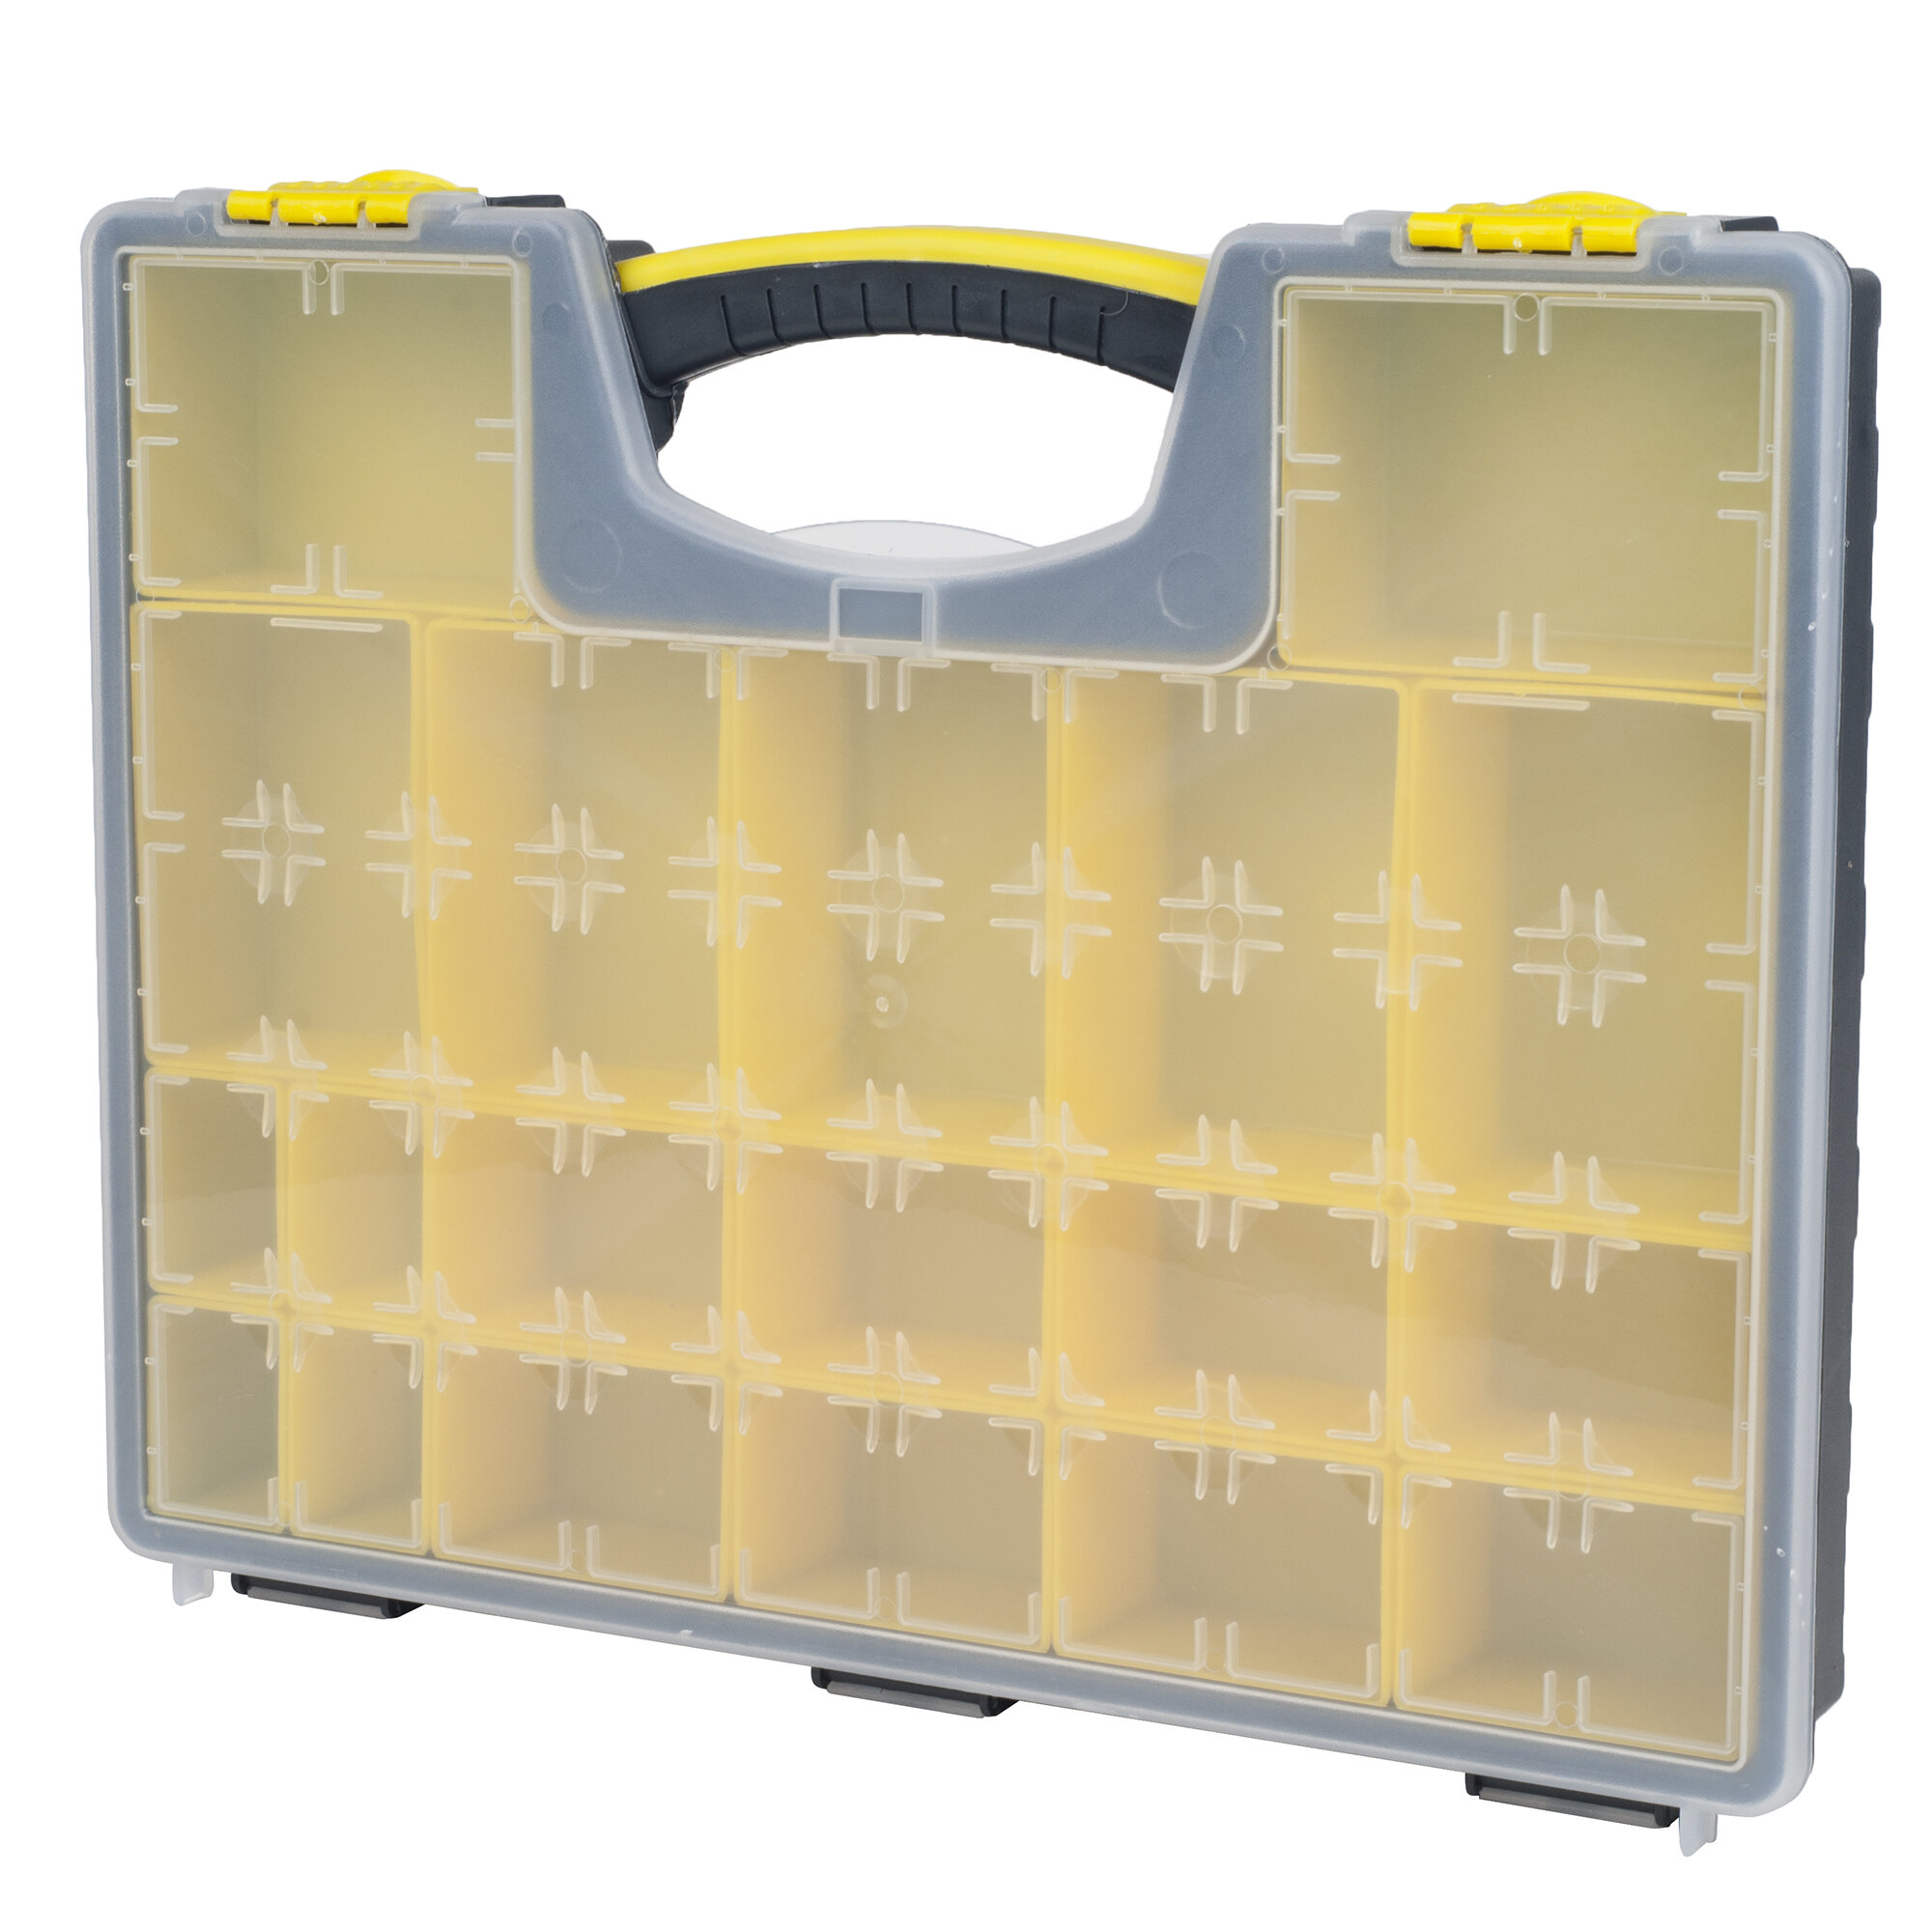 Stalwart Storage Organizer Tool Box - Clear Top Plastic Organizers for  Parts, Crafts, and Hardware & Reviews - Wayfair Canada